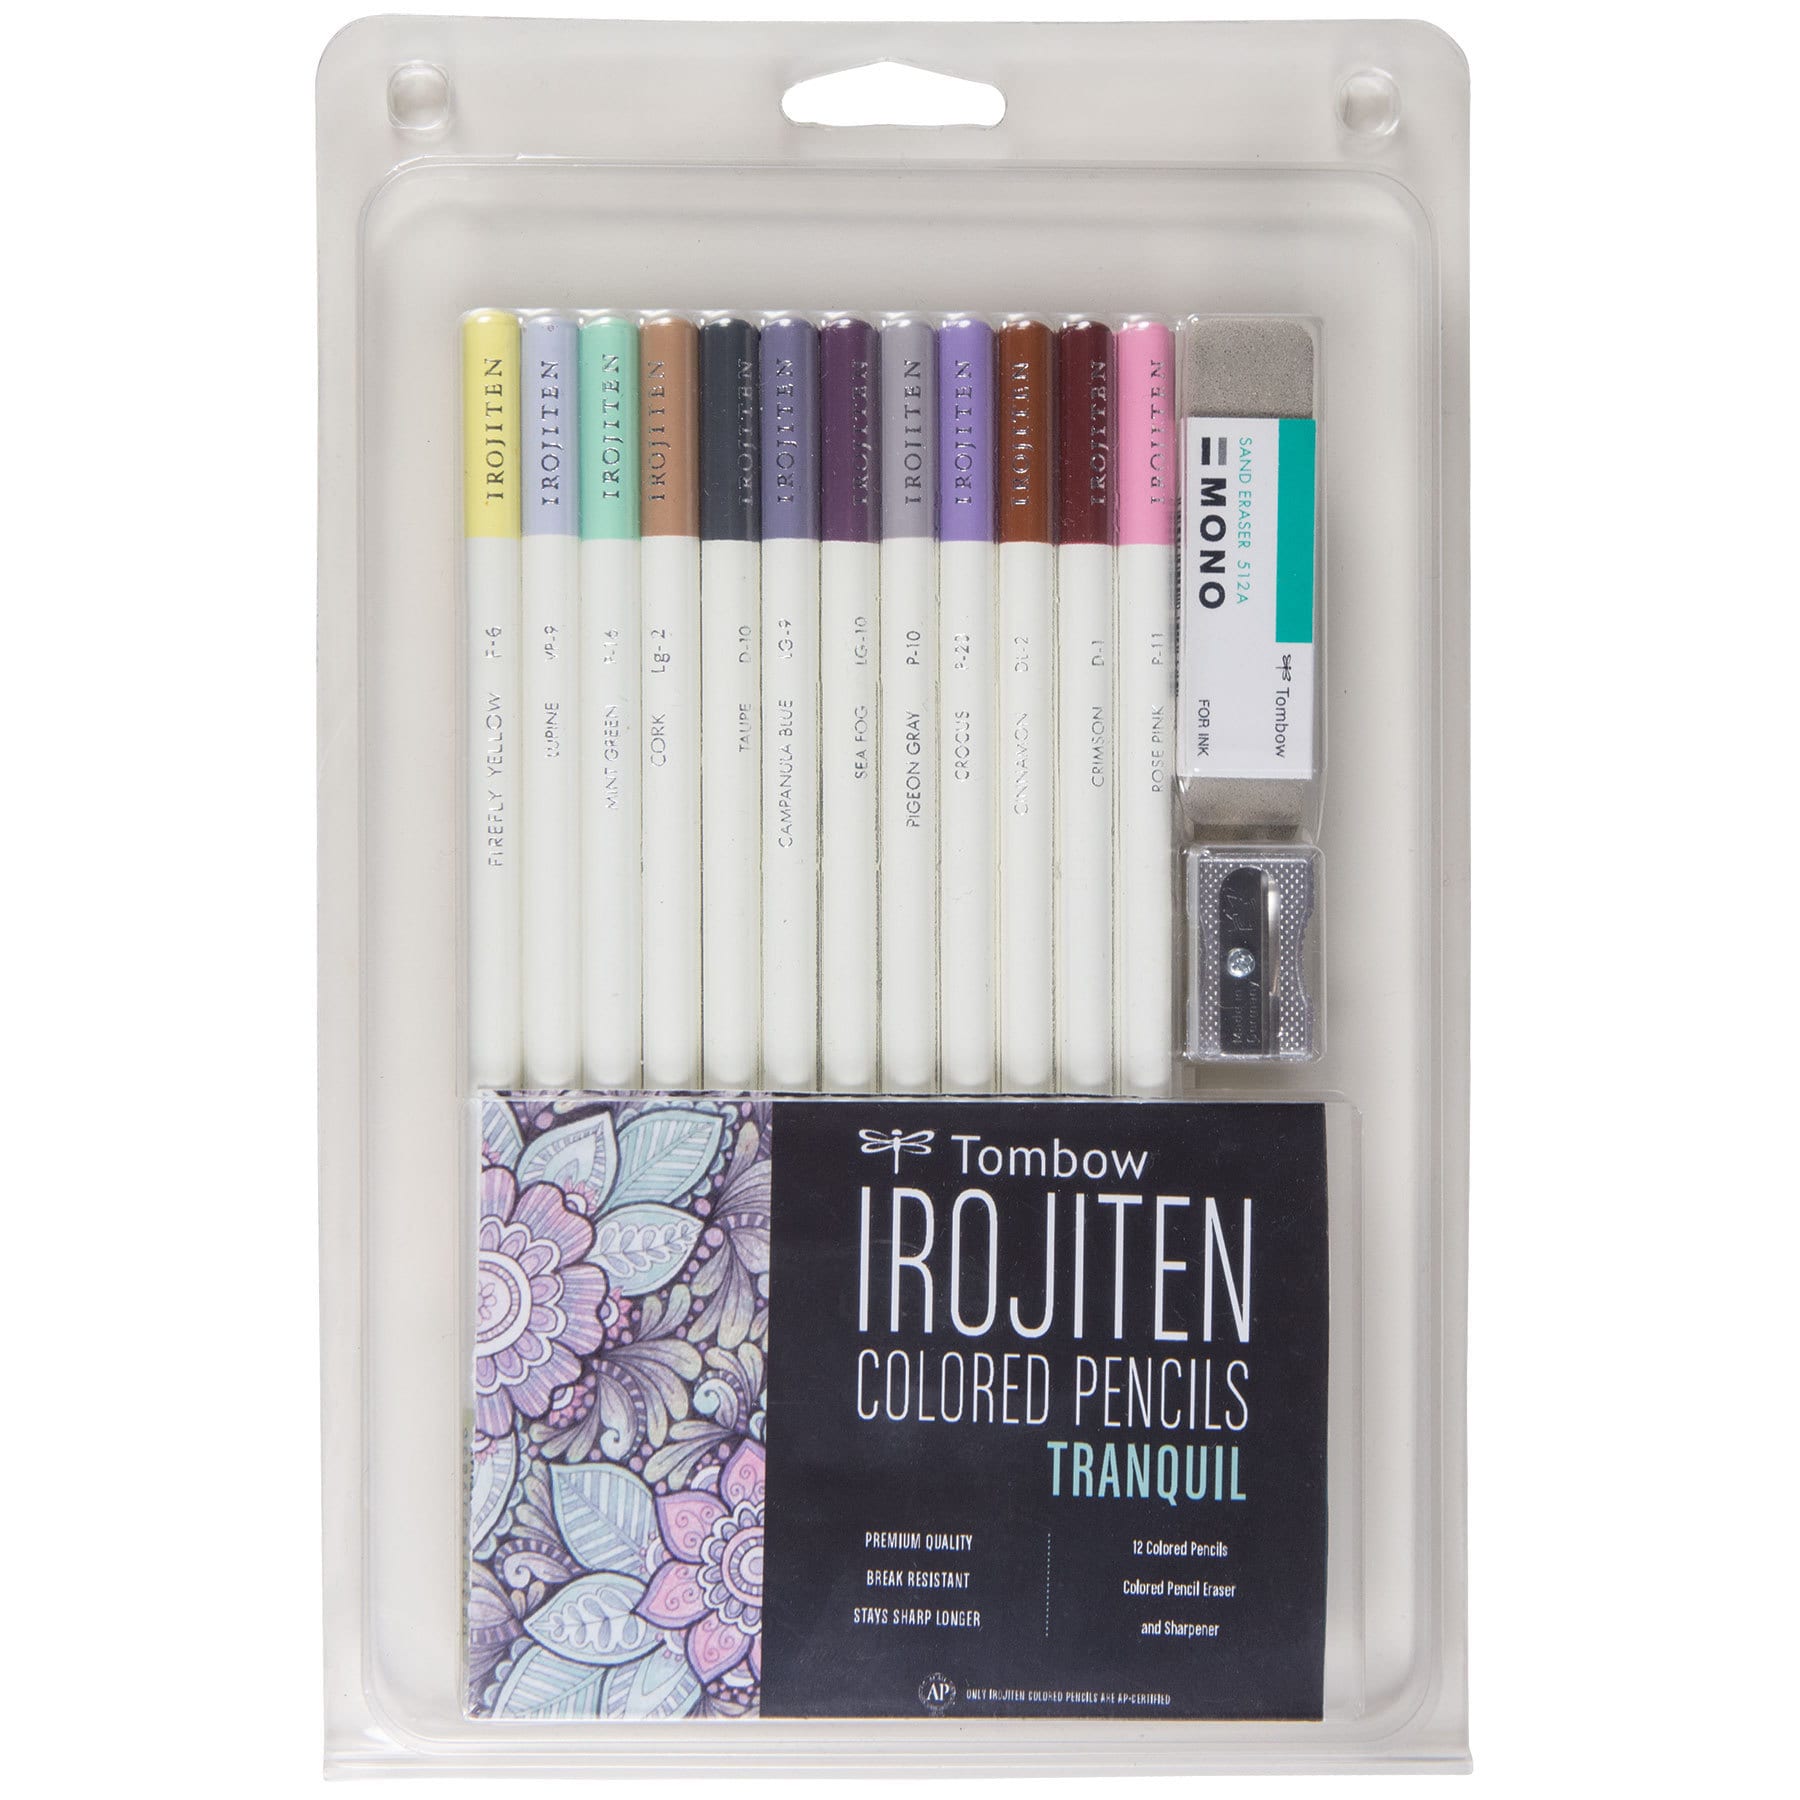 Tombow Irojiten Colored Pencil Set, Tranquil. Includes 12 Premium Colored Pencils, Sharpener, and Eraser - image 2 of 5